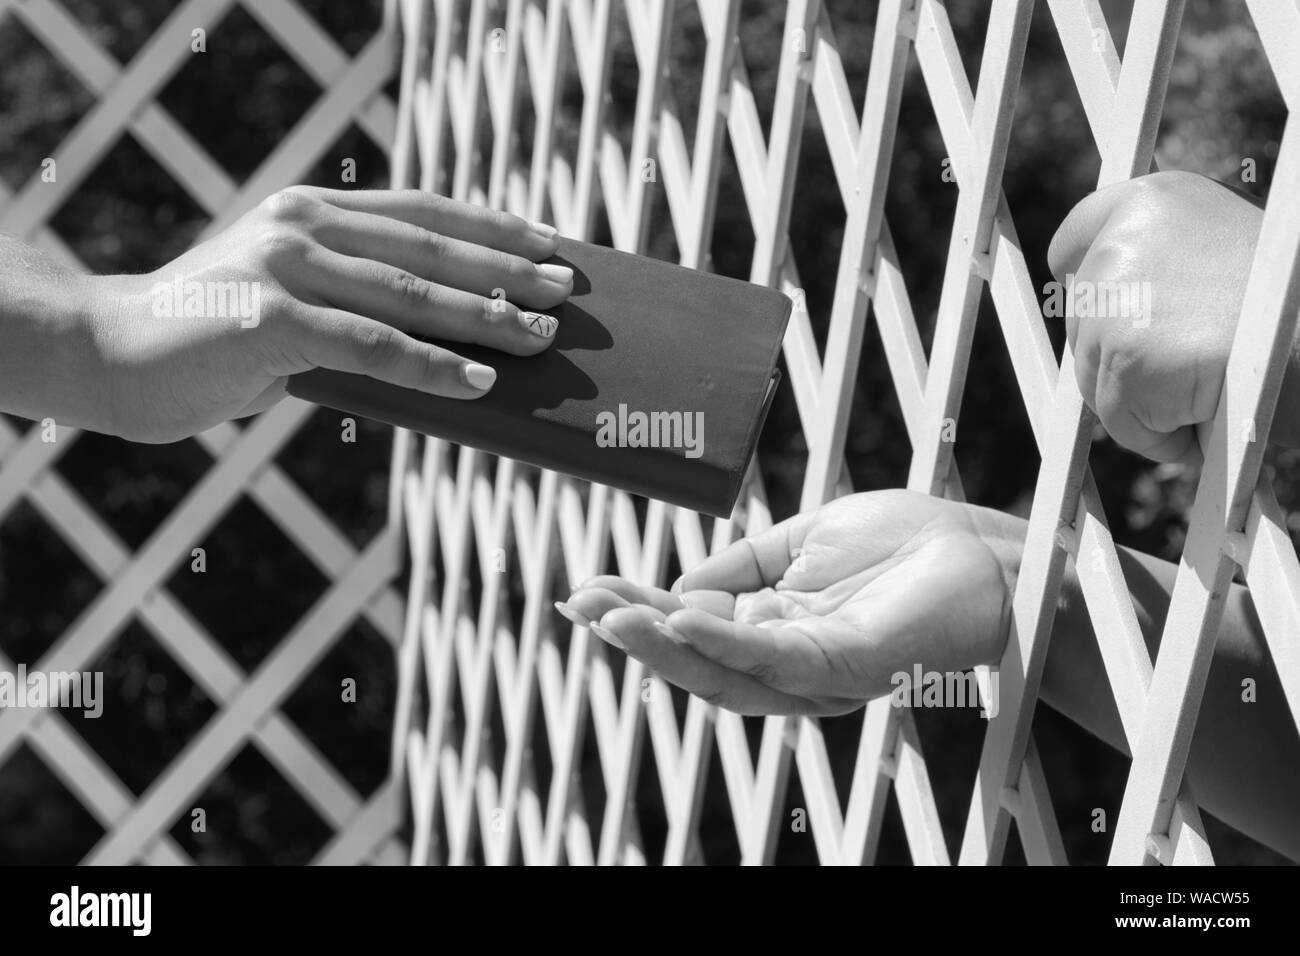 Hand on bars. Exchange of things trought bars. Social problems. Prision issue. Stock Photo